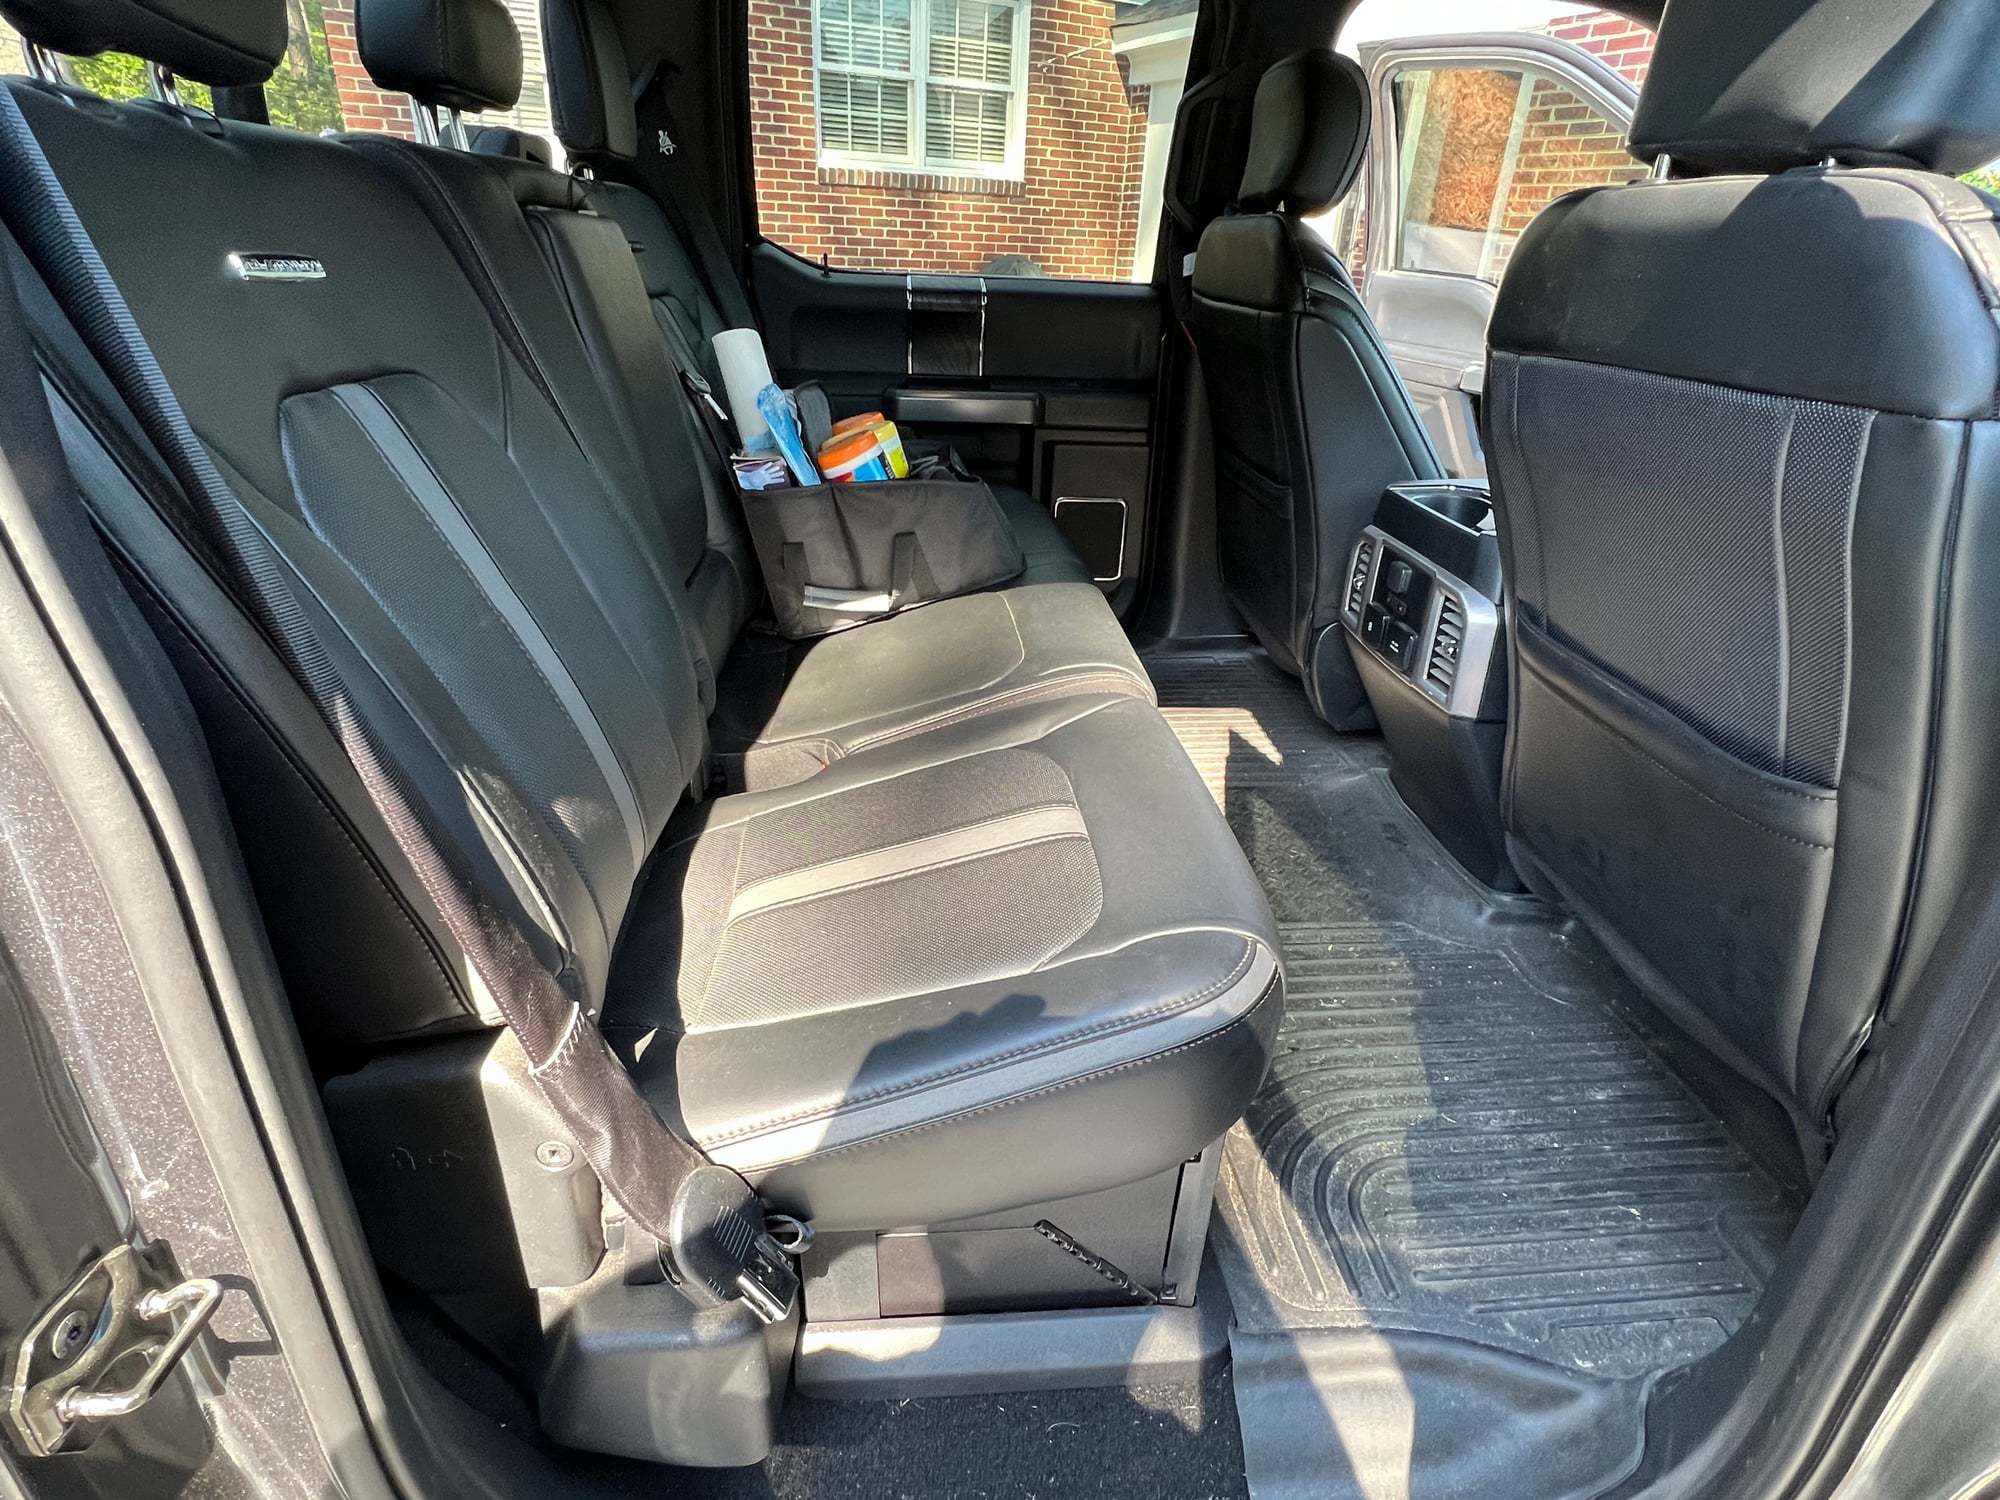 2019 Ford F-250 Super Duty - No longer for sale - Used - VIN 1111111111111111 - 29,000 Miles - 8 cyl - 4WD - Automatic - Truck - Gray - Columbia, SC 29206, United States